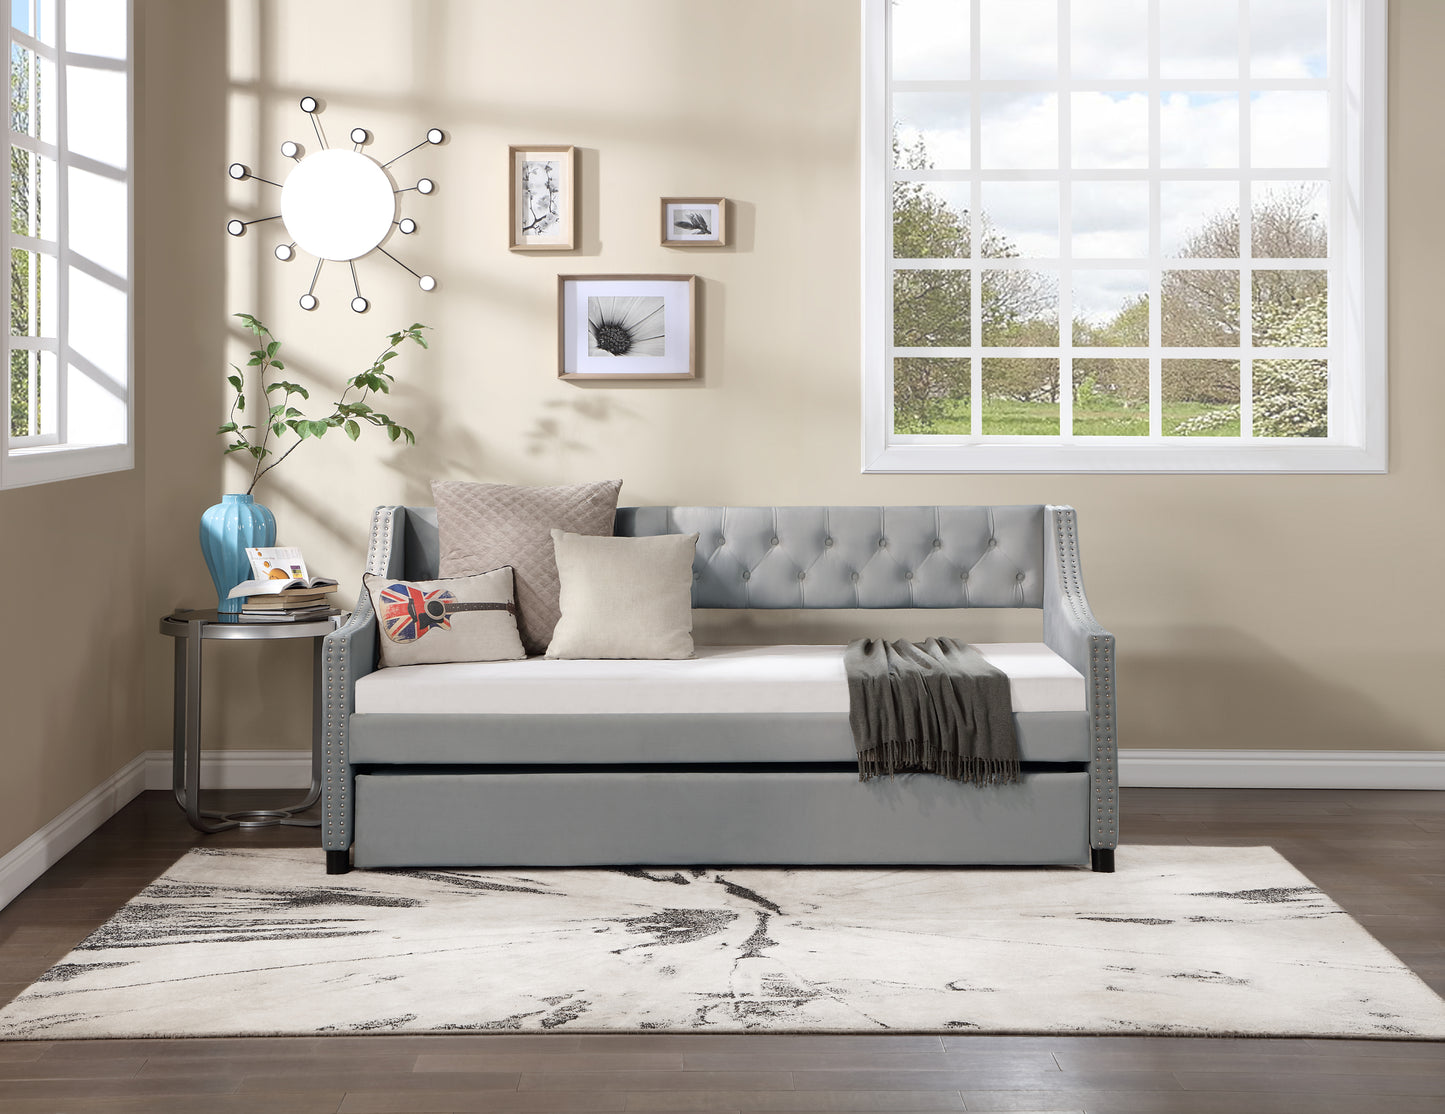 Twin Size Upholstered Daybed with Trundle,Sturdy Wood Bedframe w/ Bedframe Tufted Button & Copper Nail on Arms Design,Perfect for Bedroom,Guest Room Furniture,No Box Spring Needed